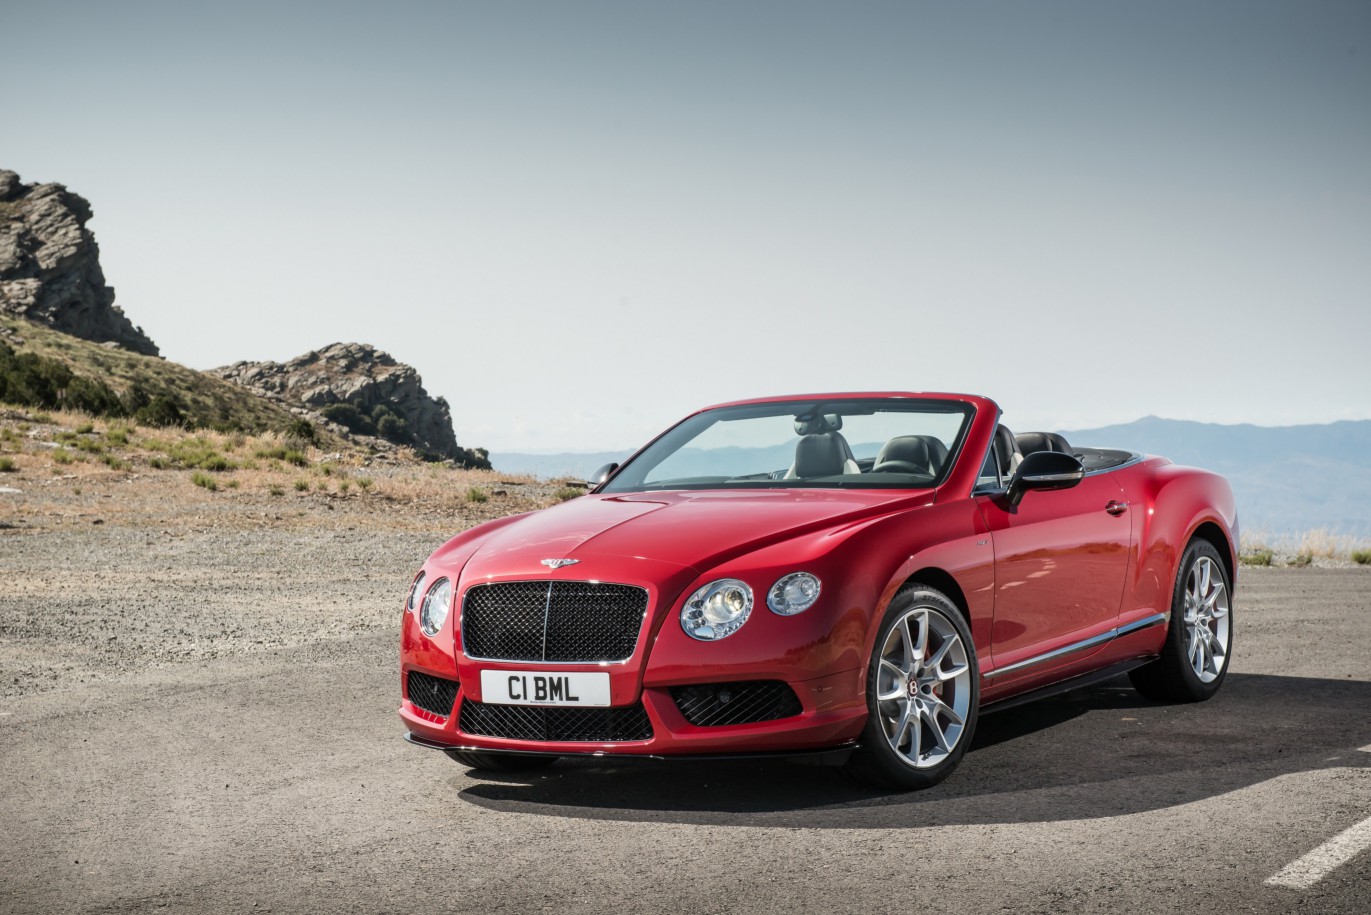 Ronnie had two Bentley Continental GT's - a hard and soft top